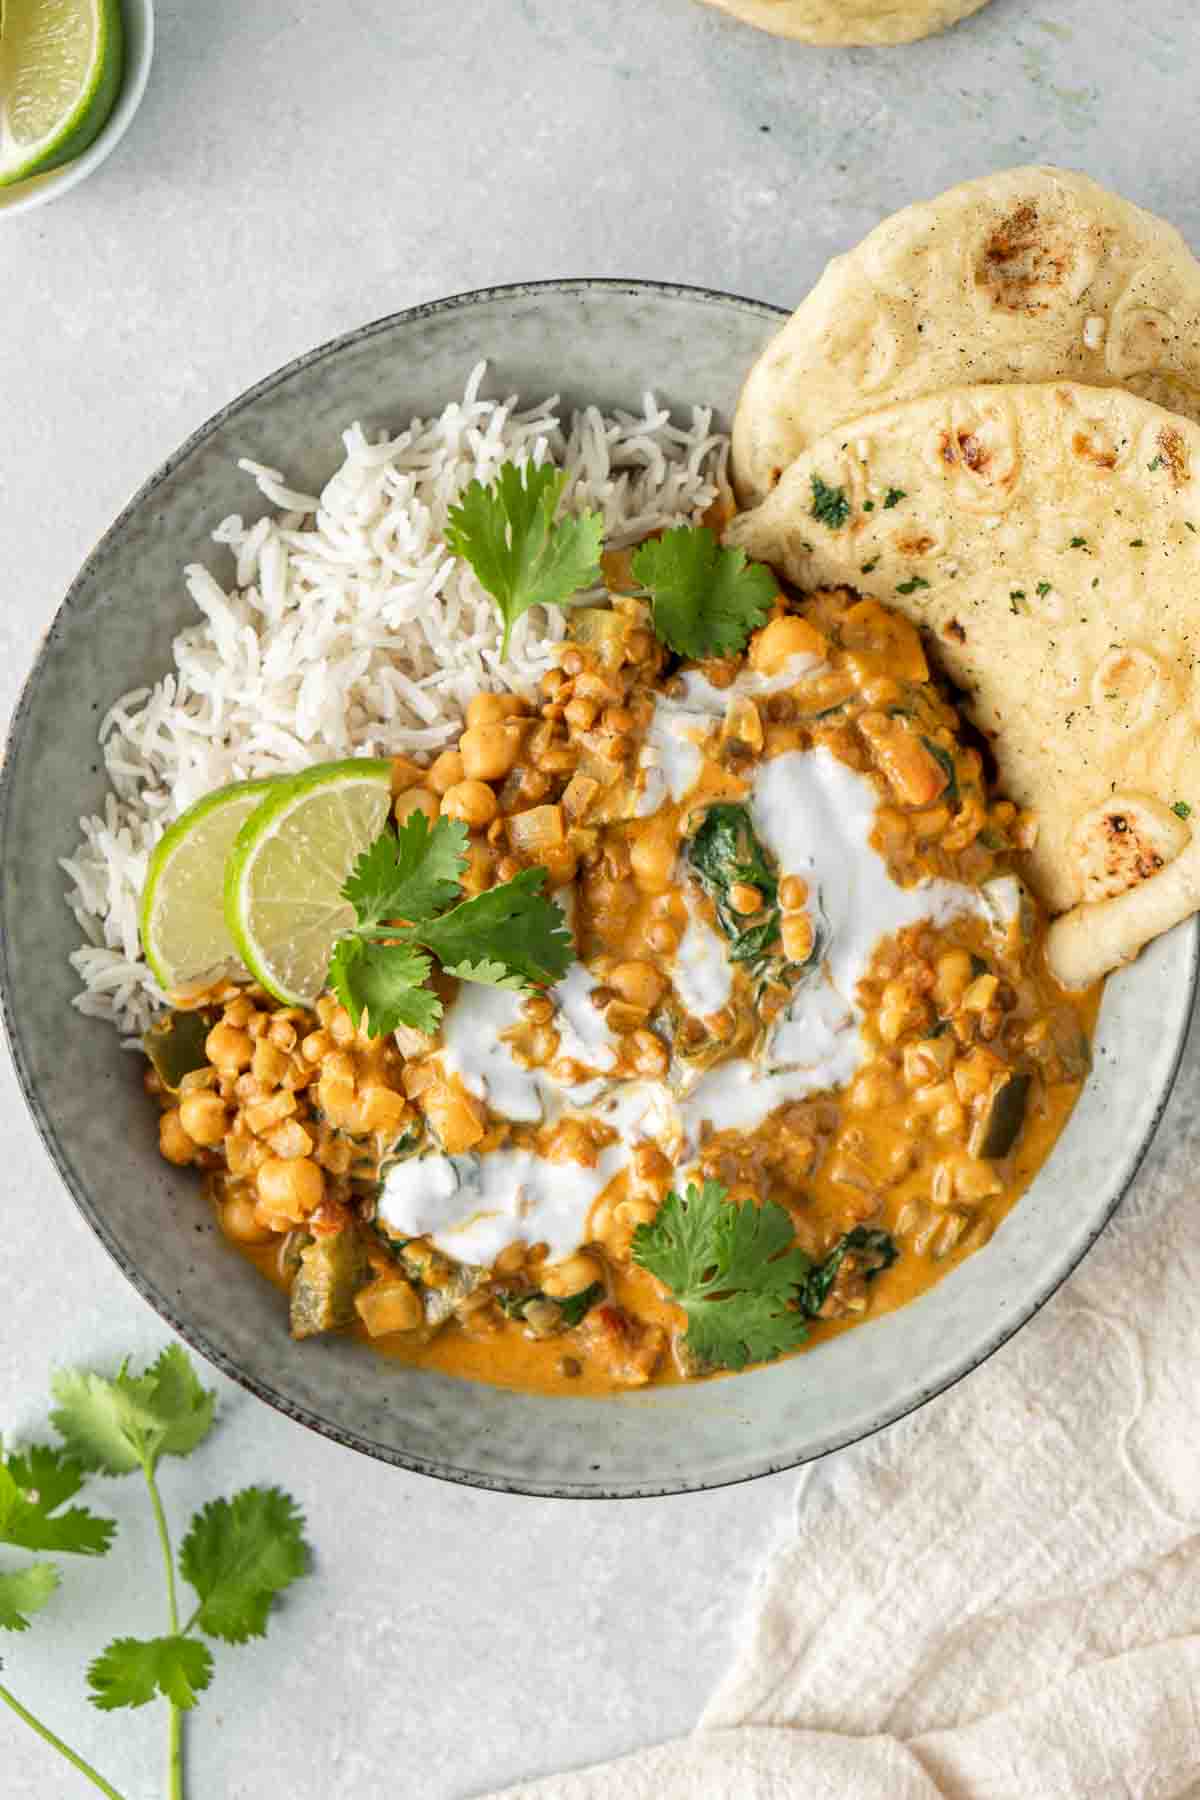 Chickpea and lentil curry served in a bowl with rice and naan.